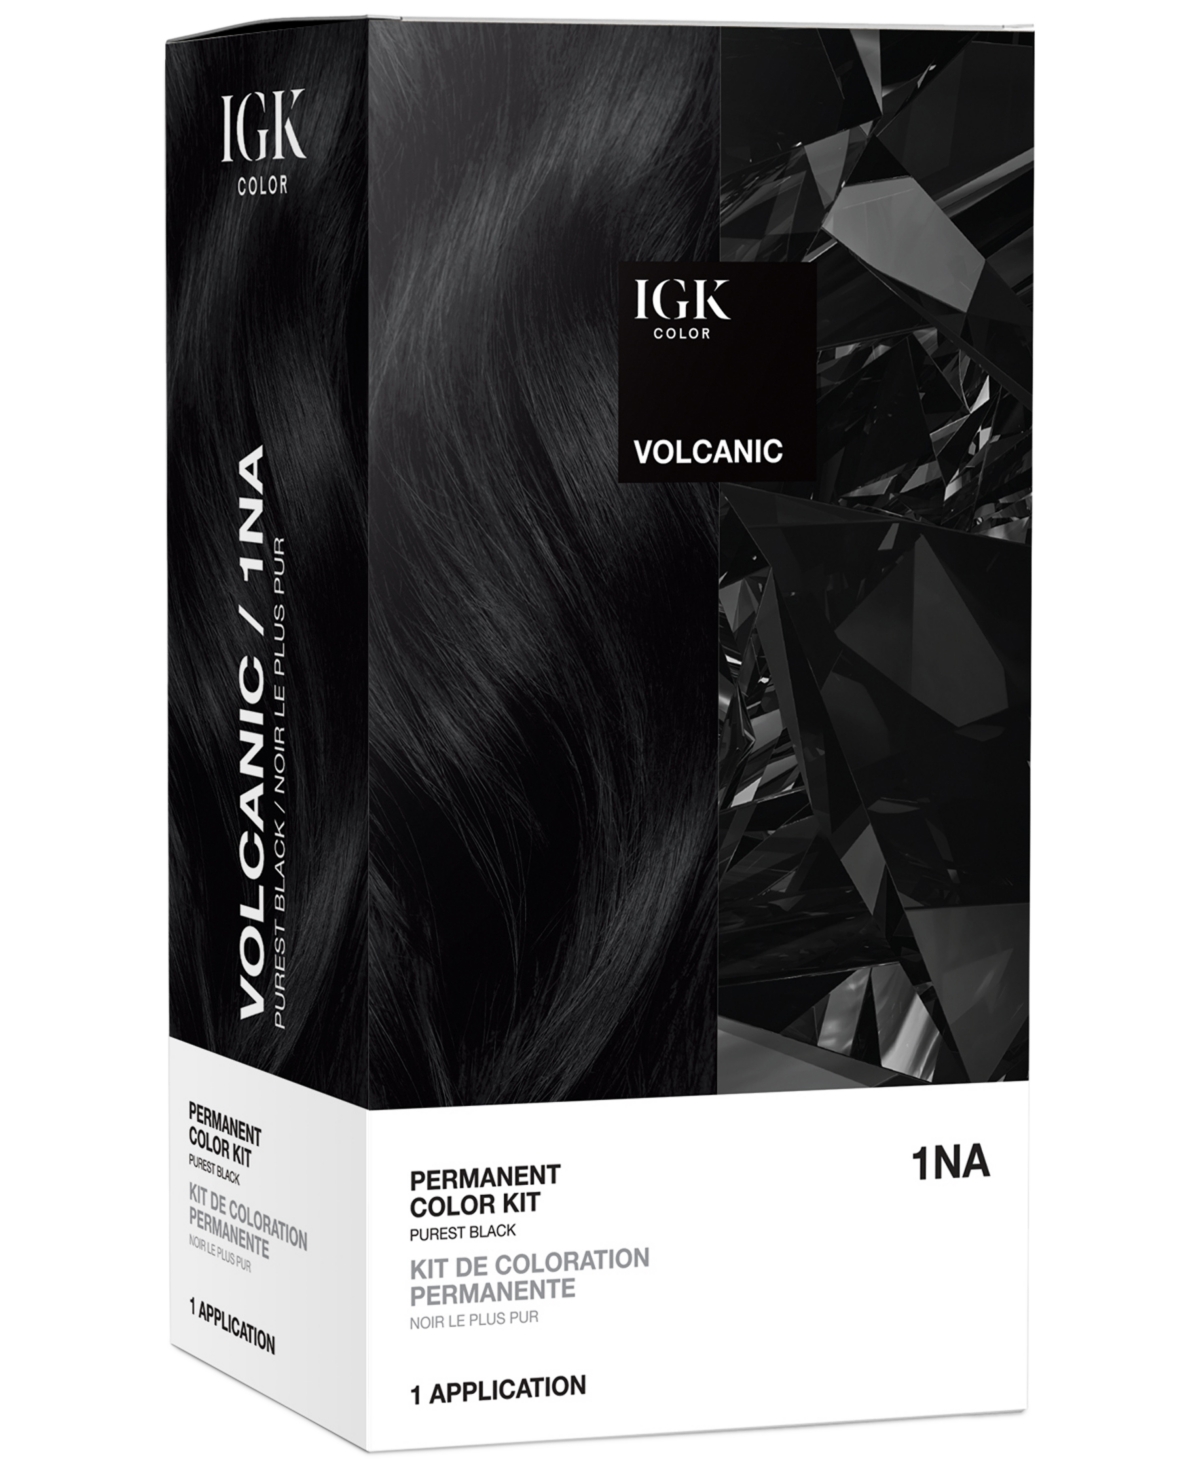 Igk Hair 6-pc. Permanent Color Set In Volcanic